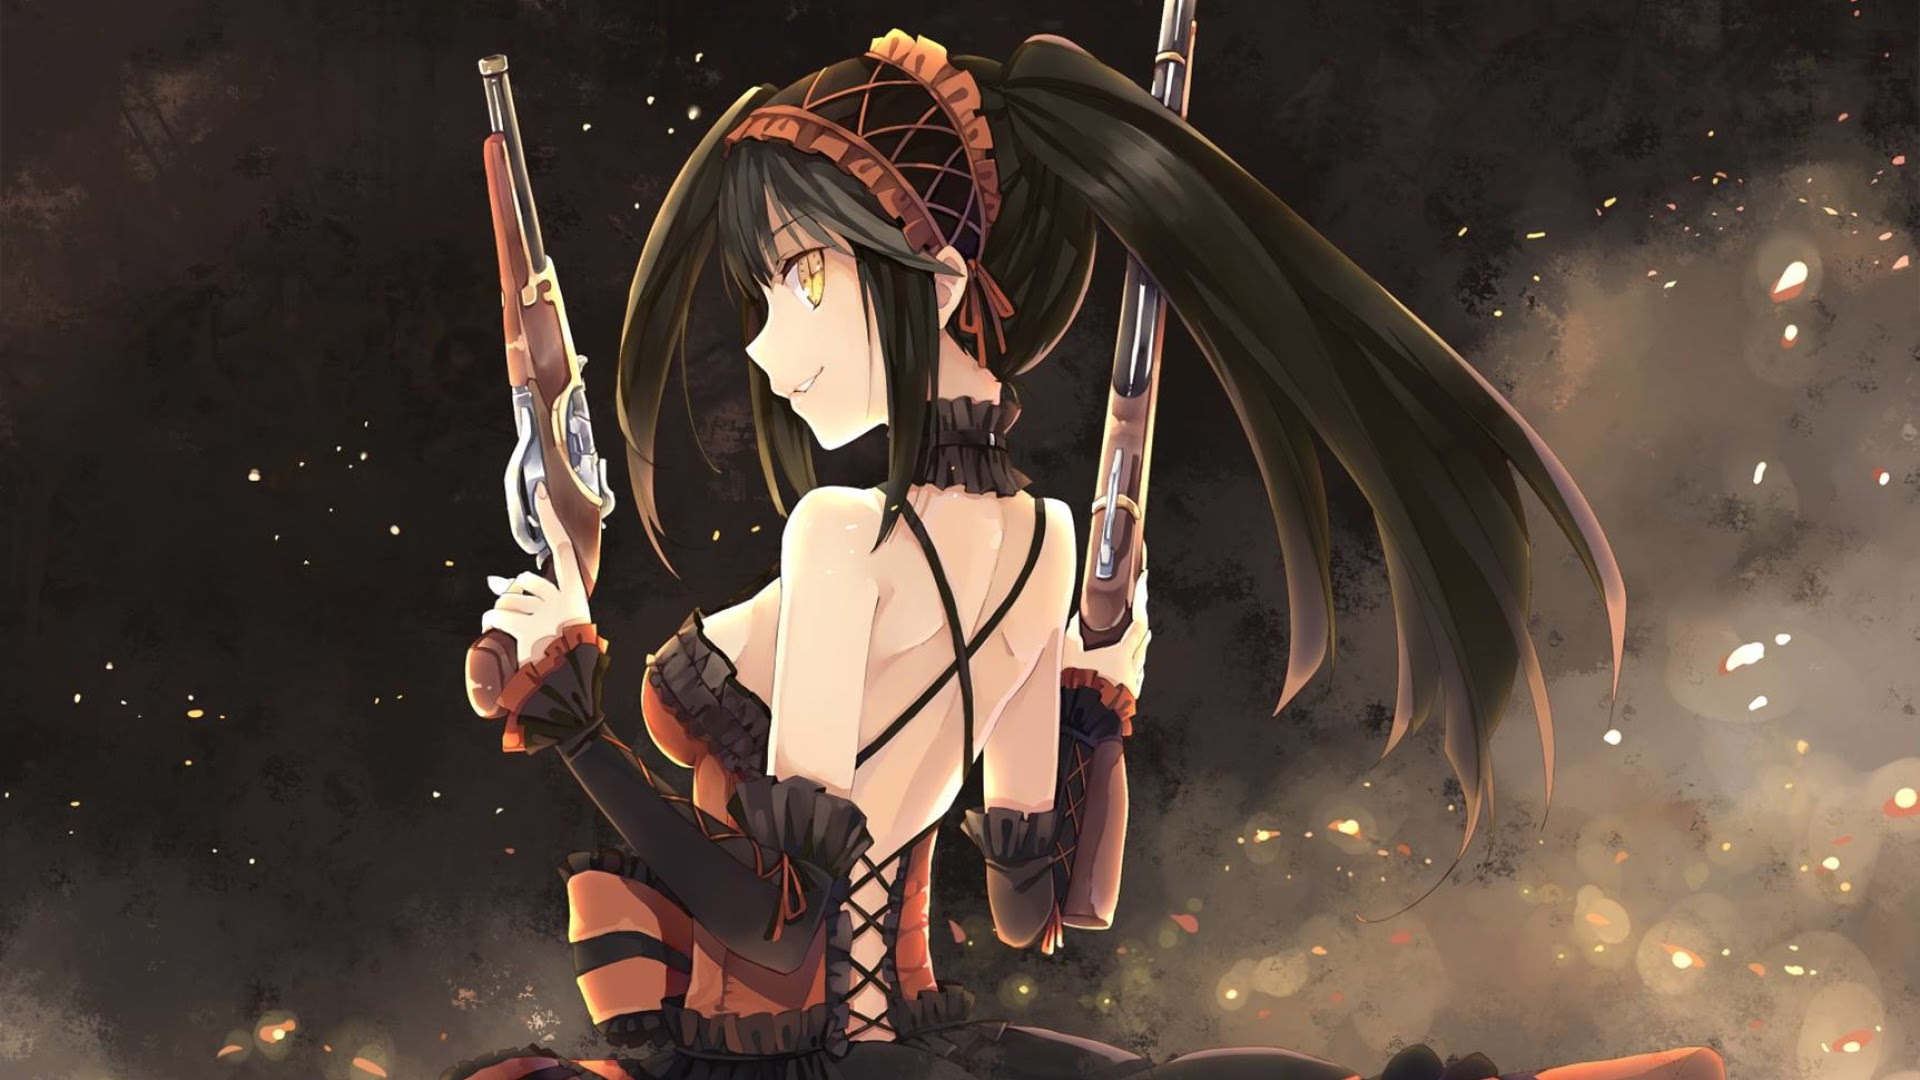 Anime 1920x1080 anime anime girls Date A Live girls with guns weapon yellow eyes brunette long hair